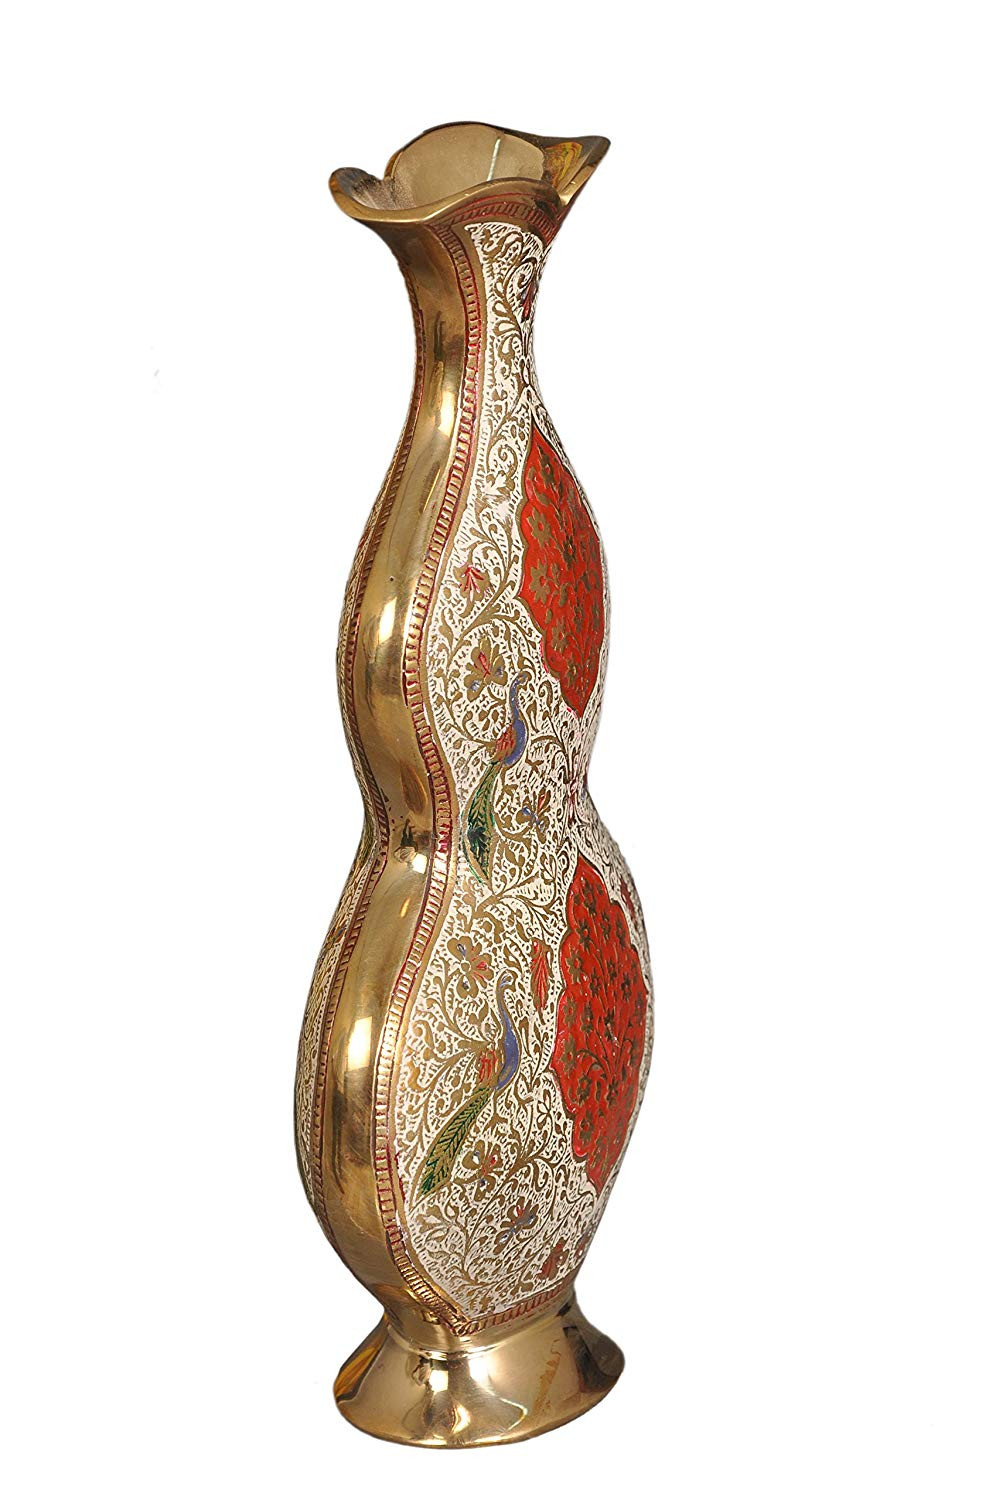 20 Cute Antique Brass Vase Made In India 2023 free download antique brass vase made in india of buy nutristar beautiful home ddecorative flower vase brass with buy nutristar beautiful home ddecorative flower vase brass traditional red online at low p